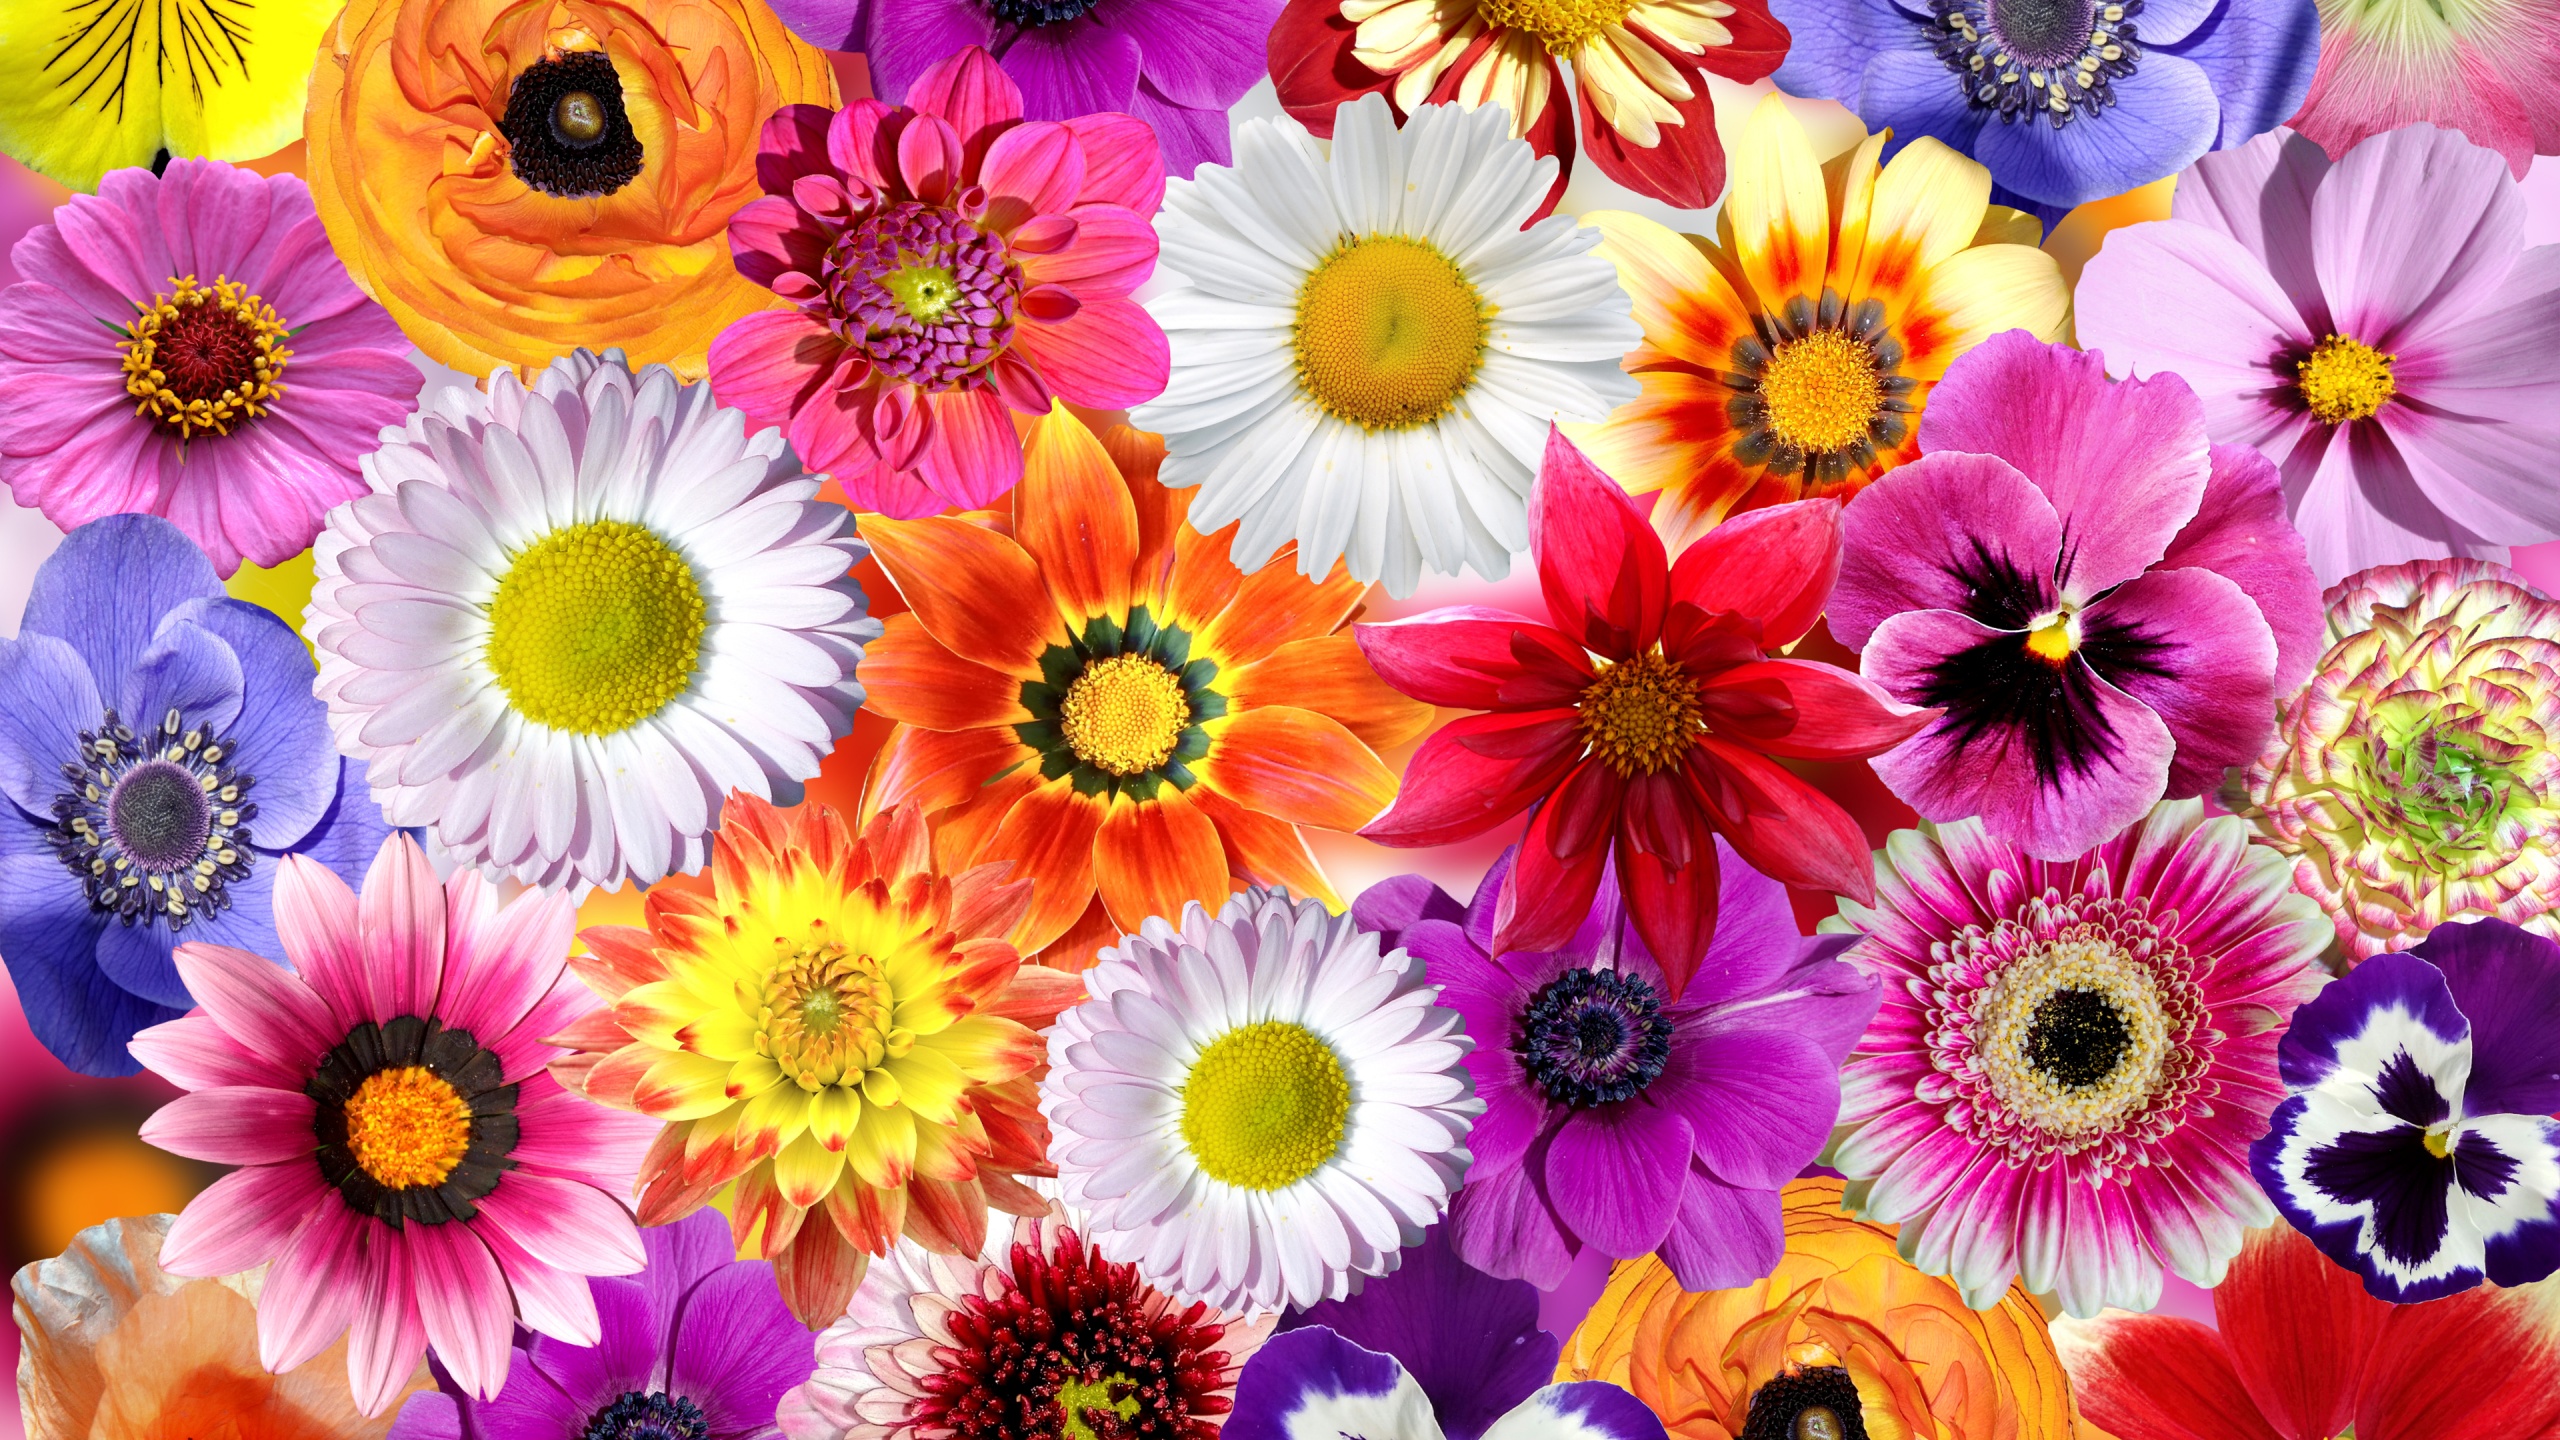 Daisy flowers Wallpaper 4K, Floral Background